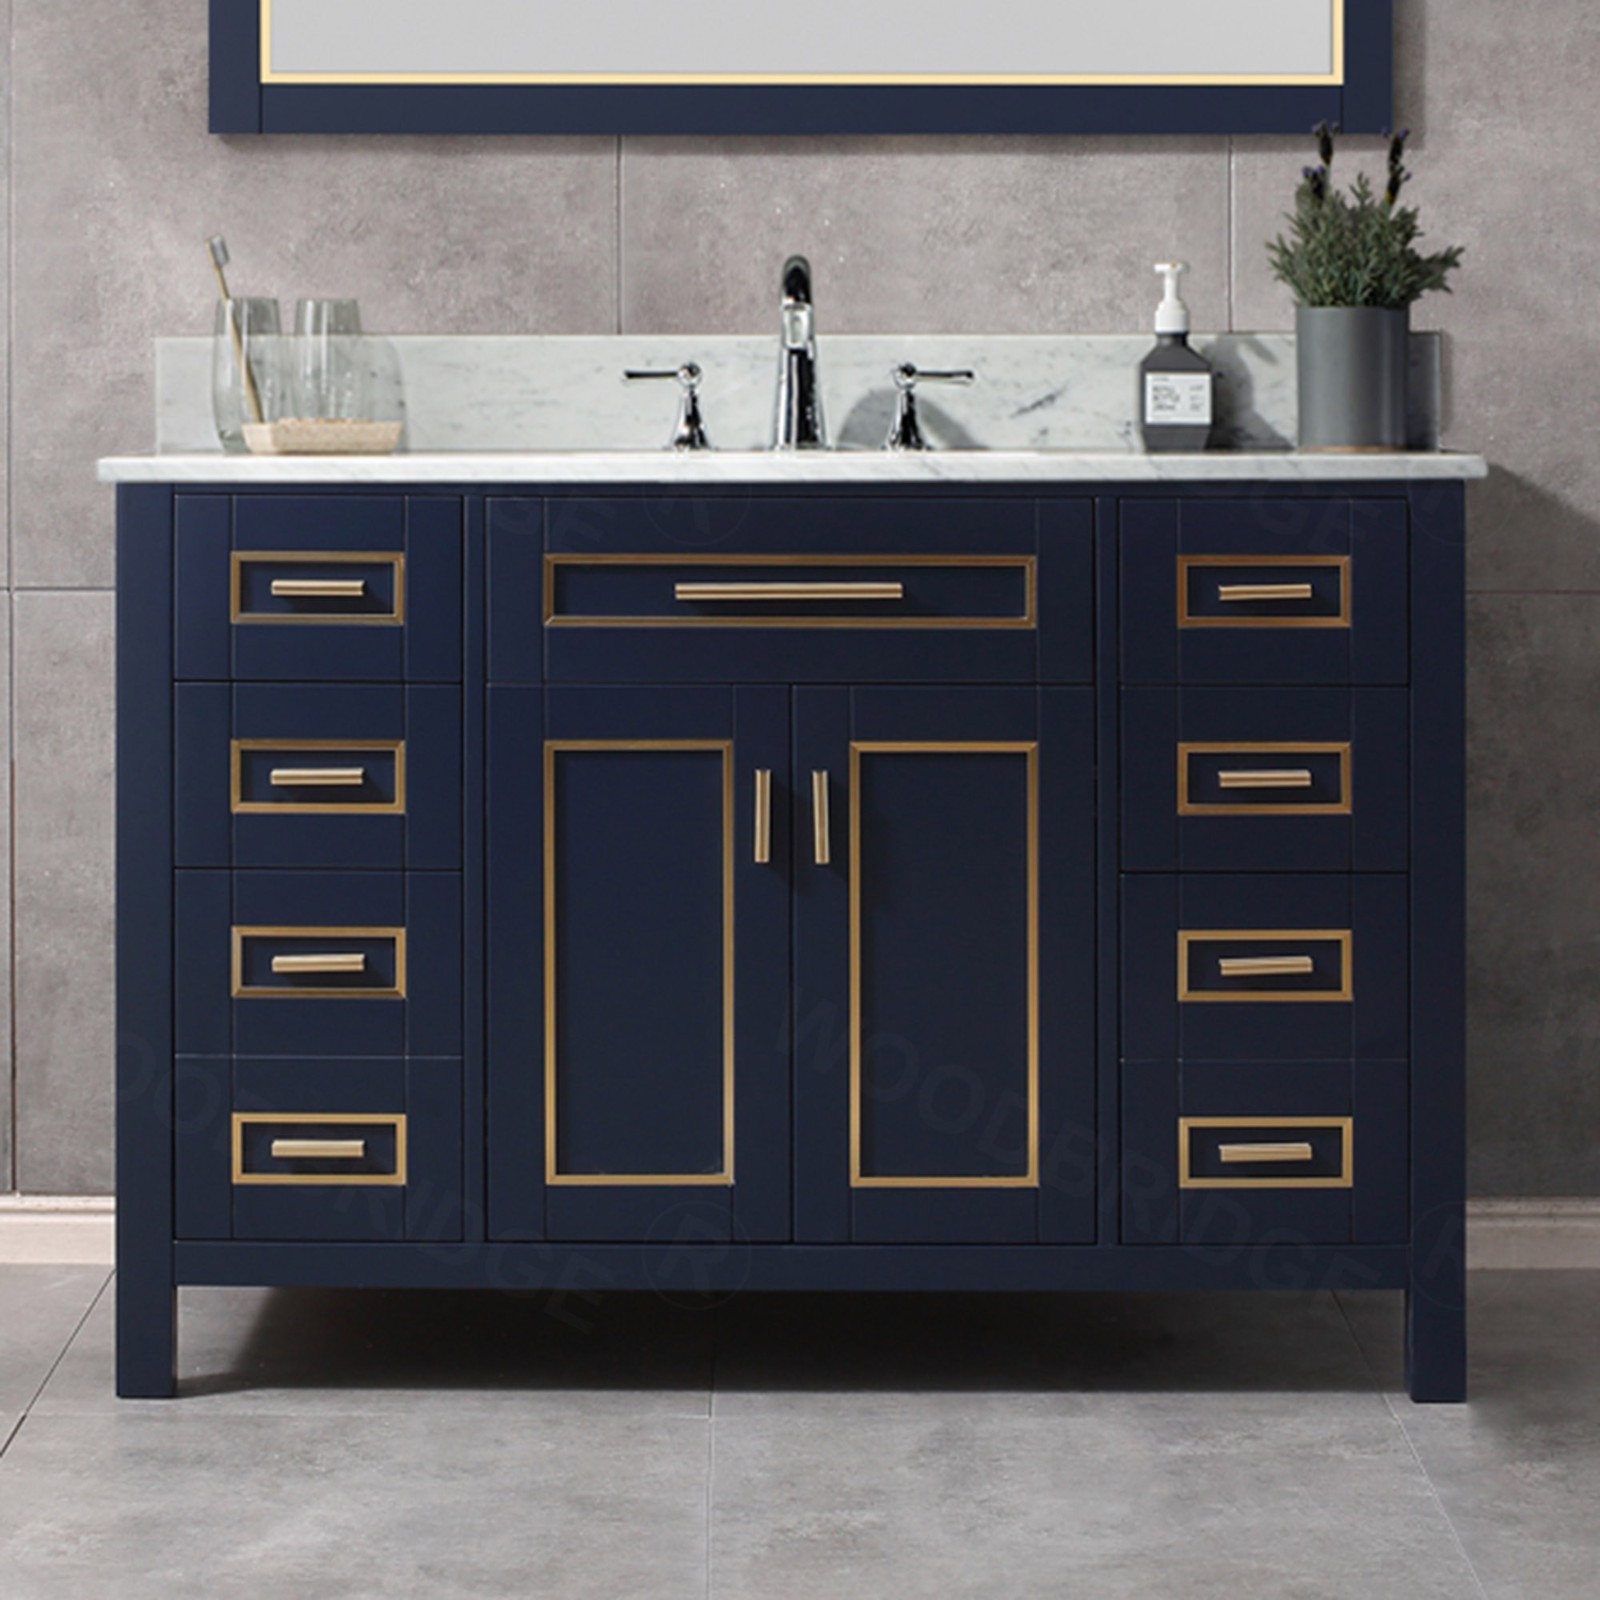  WOODBRIDGE Milan  49” Floor Mounted Single Basin Vanity Set with Solid Wood Cabinet in Navy Blue, and Carrara White Marble Vanity Top with Pre-installed Undermount Rectangle Bathroom Sink in White, Pre-Drilled 3-Hole for 4-inch Centerset Faucet_4738